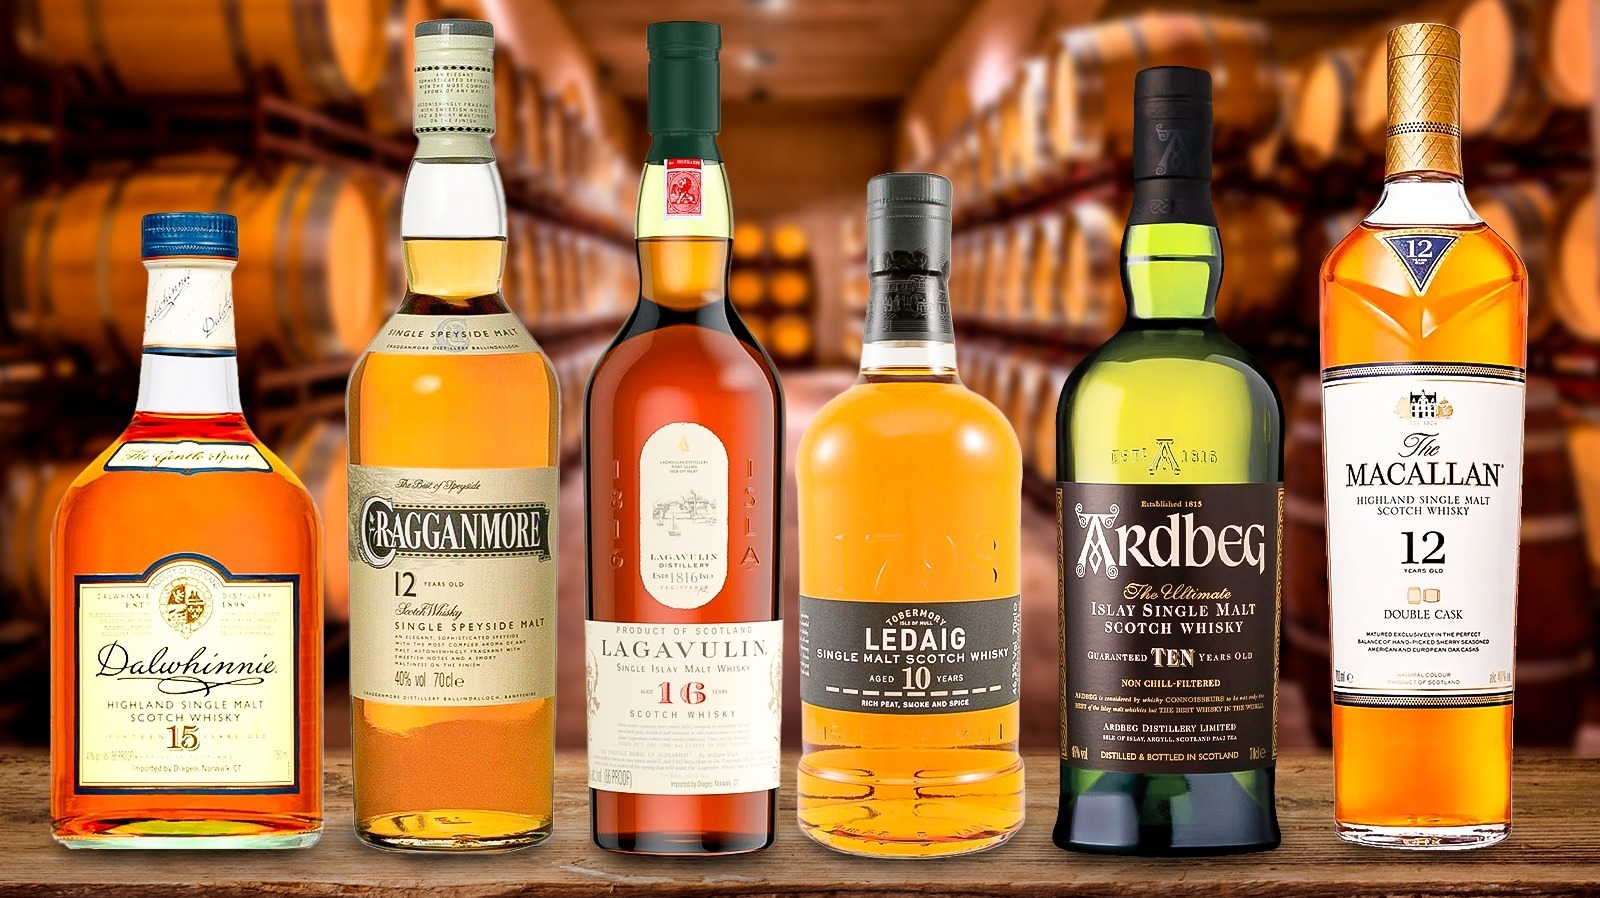 Why You Should Buy Costco's Latest Scotch Whisky Expressions